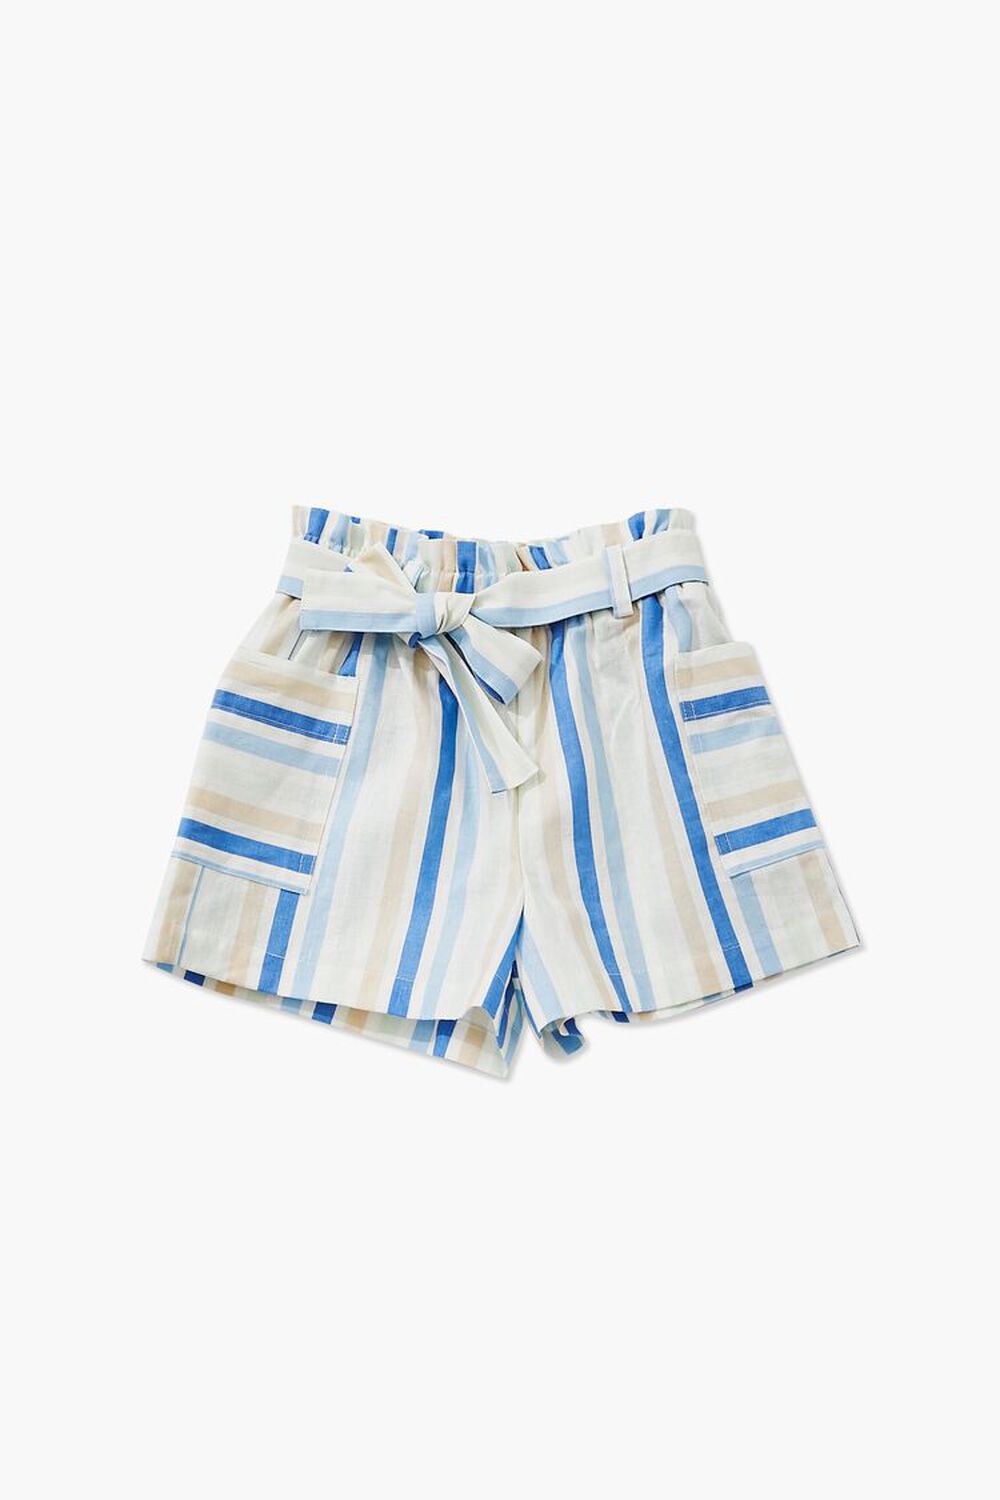 TAUPE/MULTI Girls Belted Striped Shorts (Kids), image 1